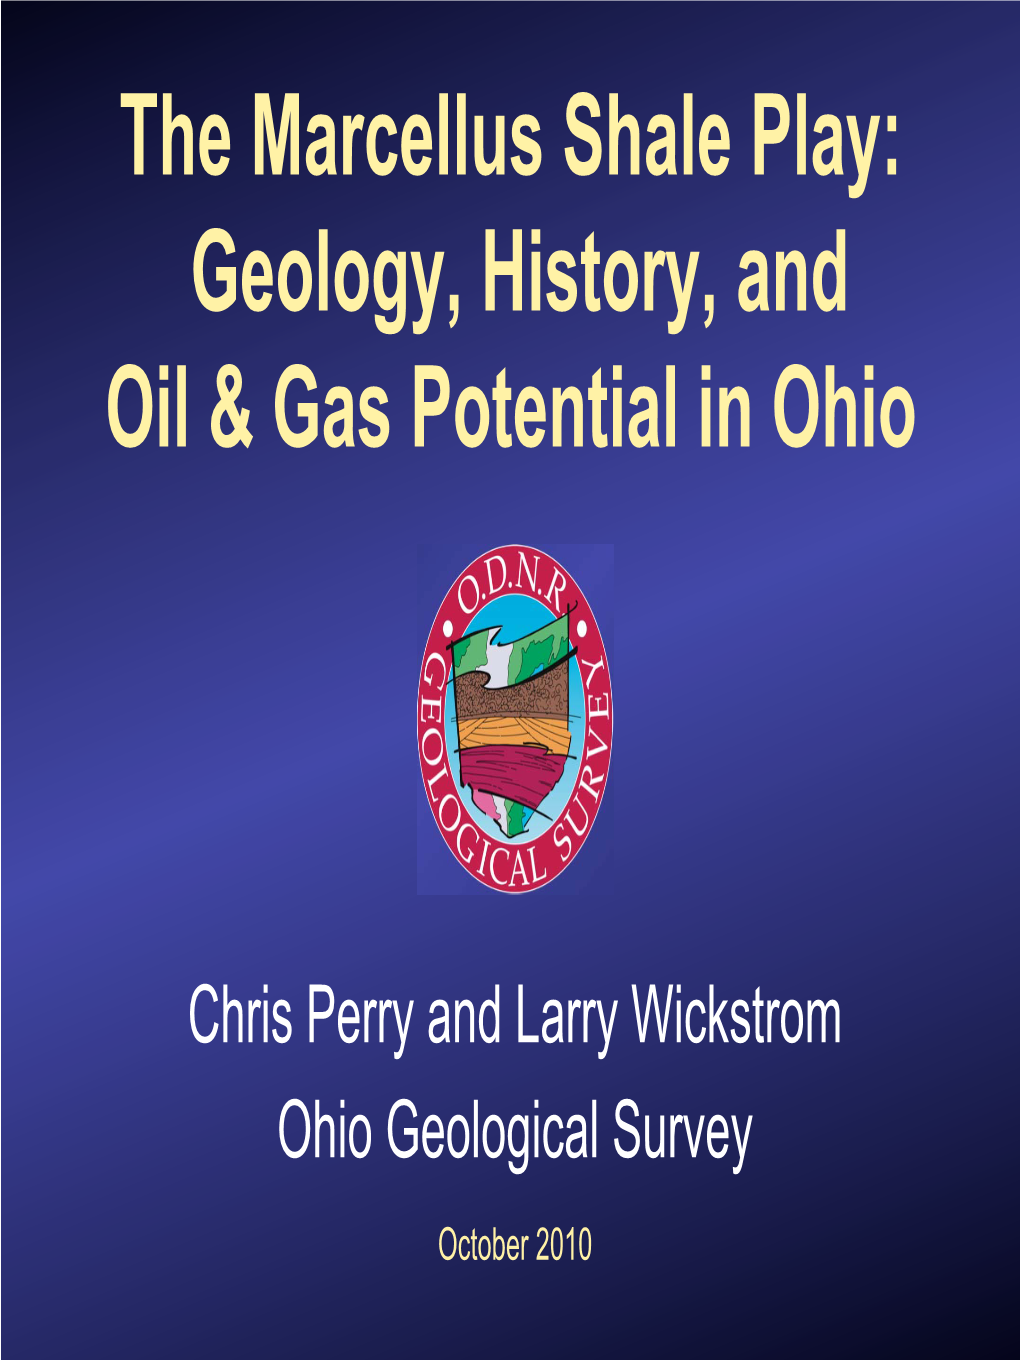 The Marcellus Shale Play: Geology, History, and Oil & Gas Potential In